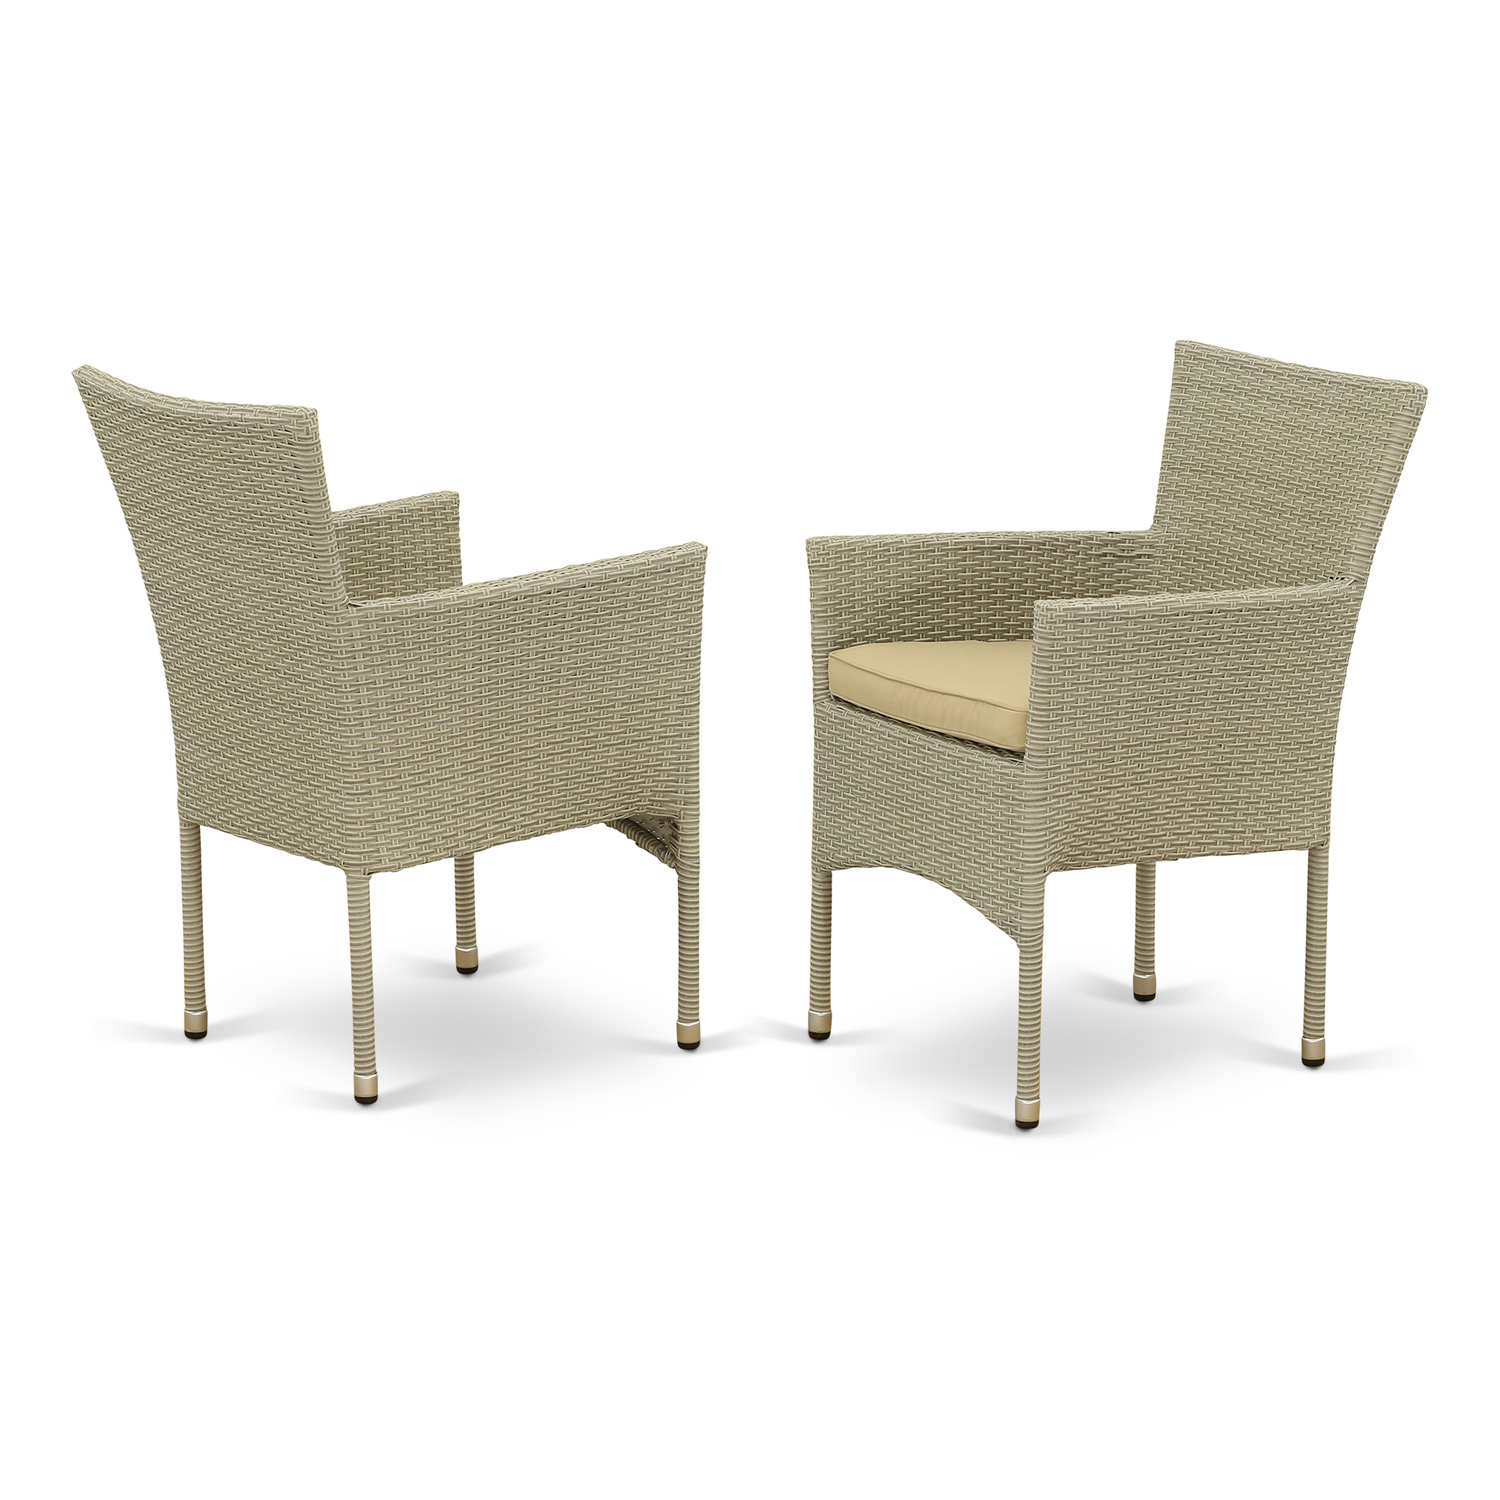 East West Furniture Bork Metal & Wicker Patio Dining Chair in Natural (Set of 2) - image 2 of 3